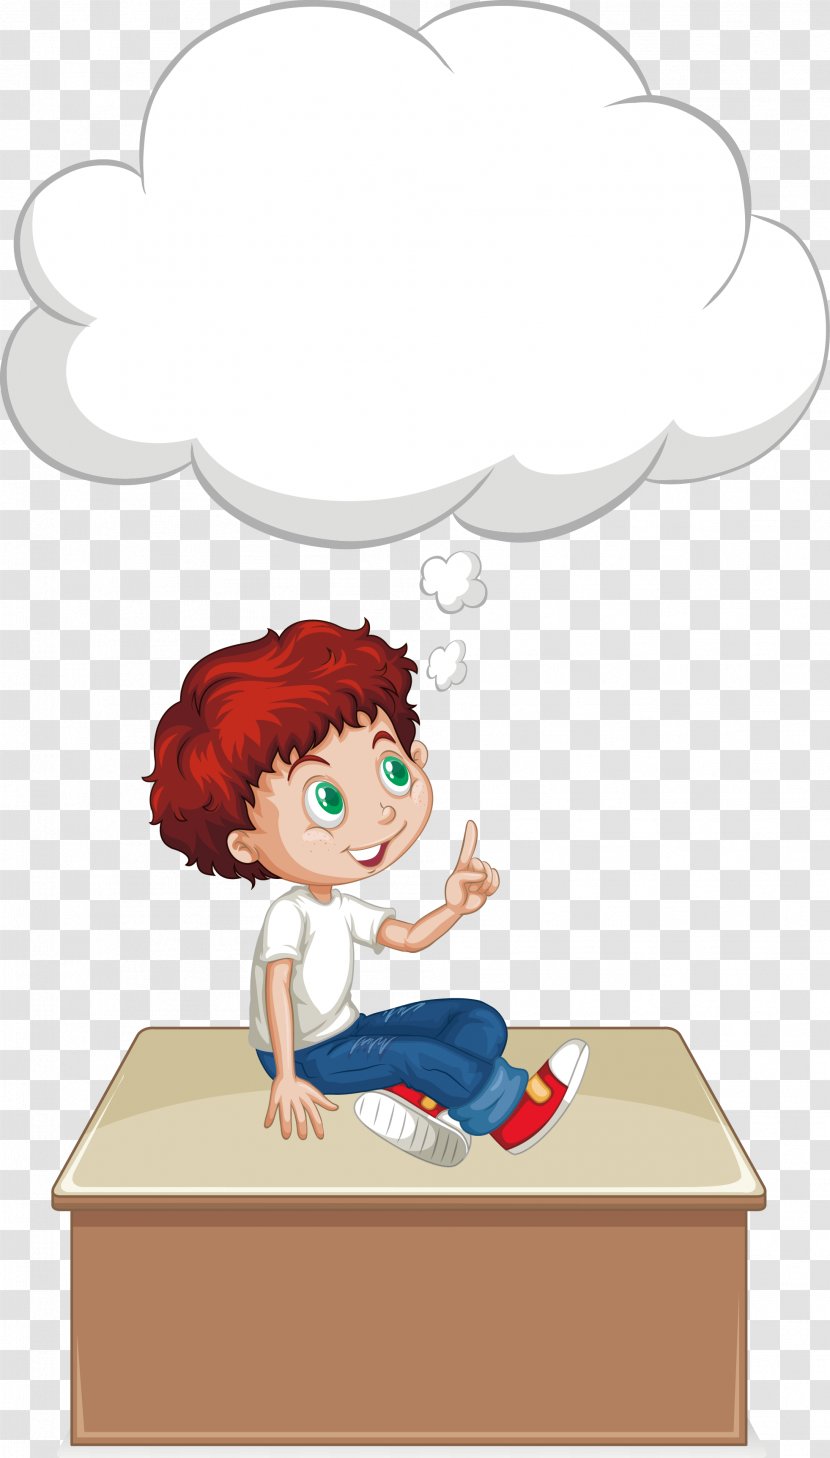 Boy Euclidean Vector Thought Illustration - Flower - Sitting On The Table Thinking Transparent PNG